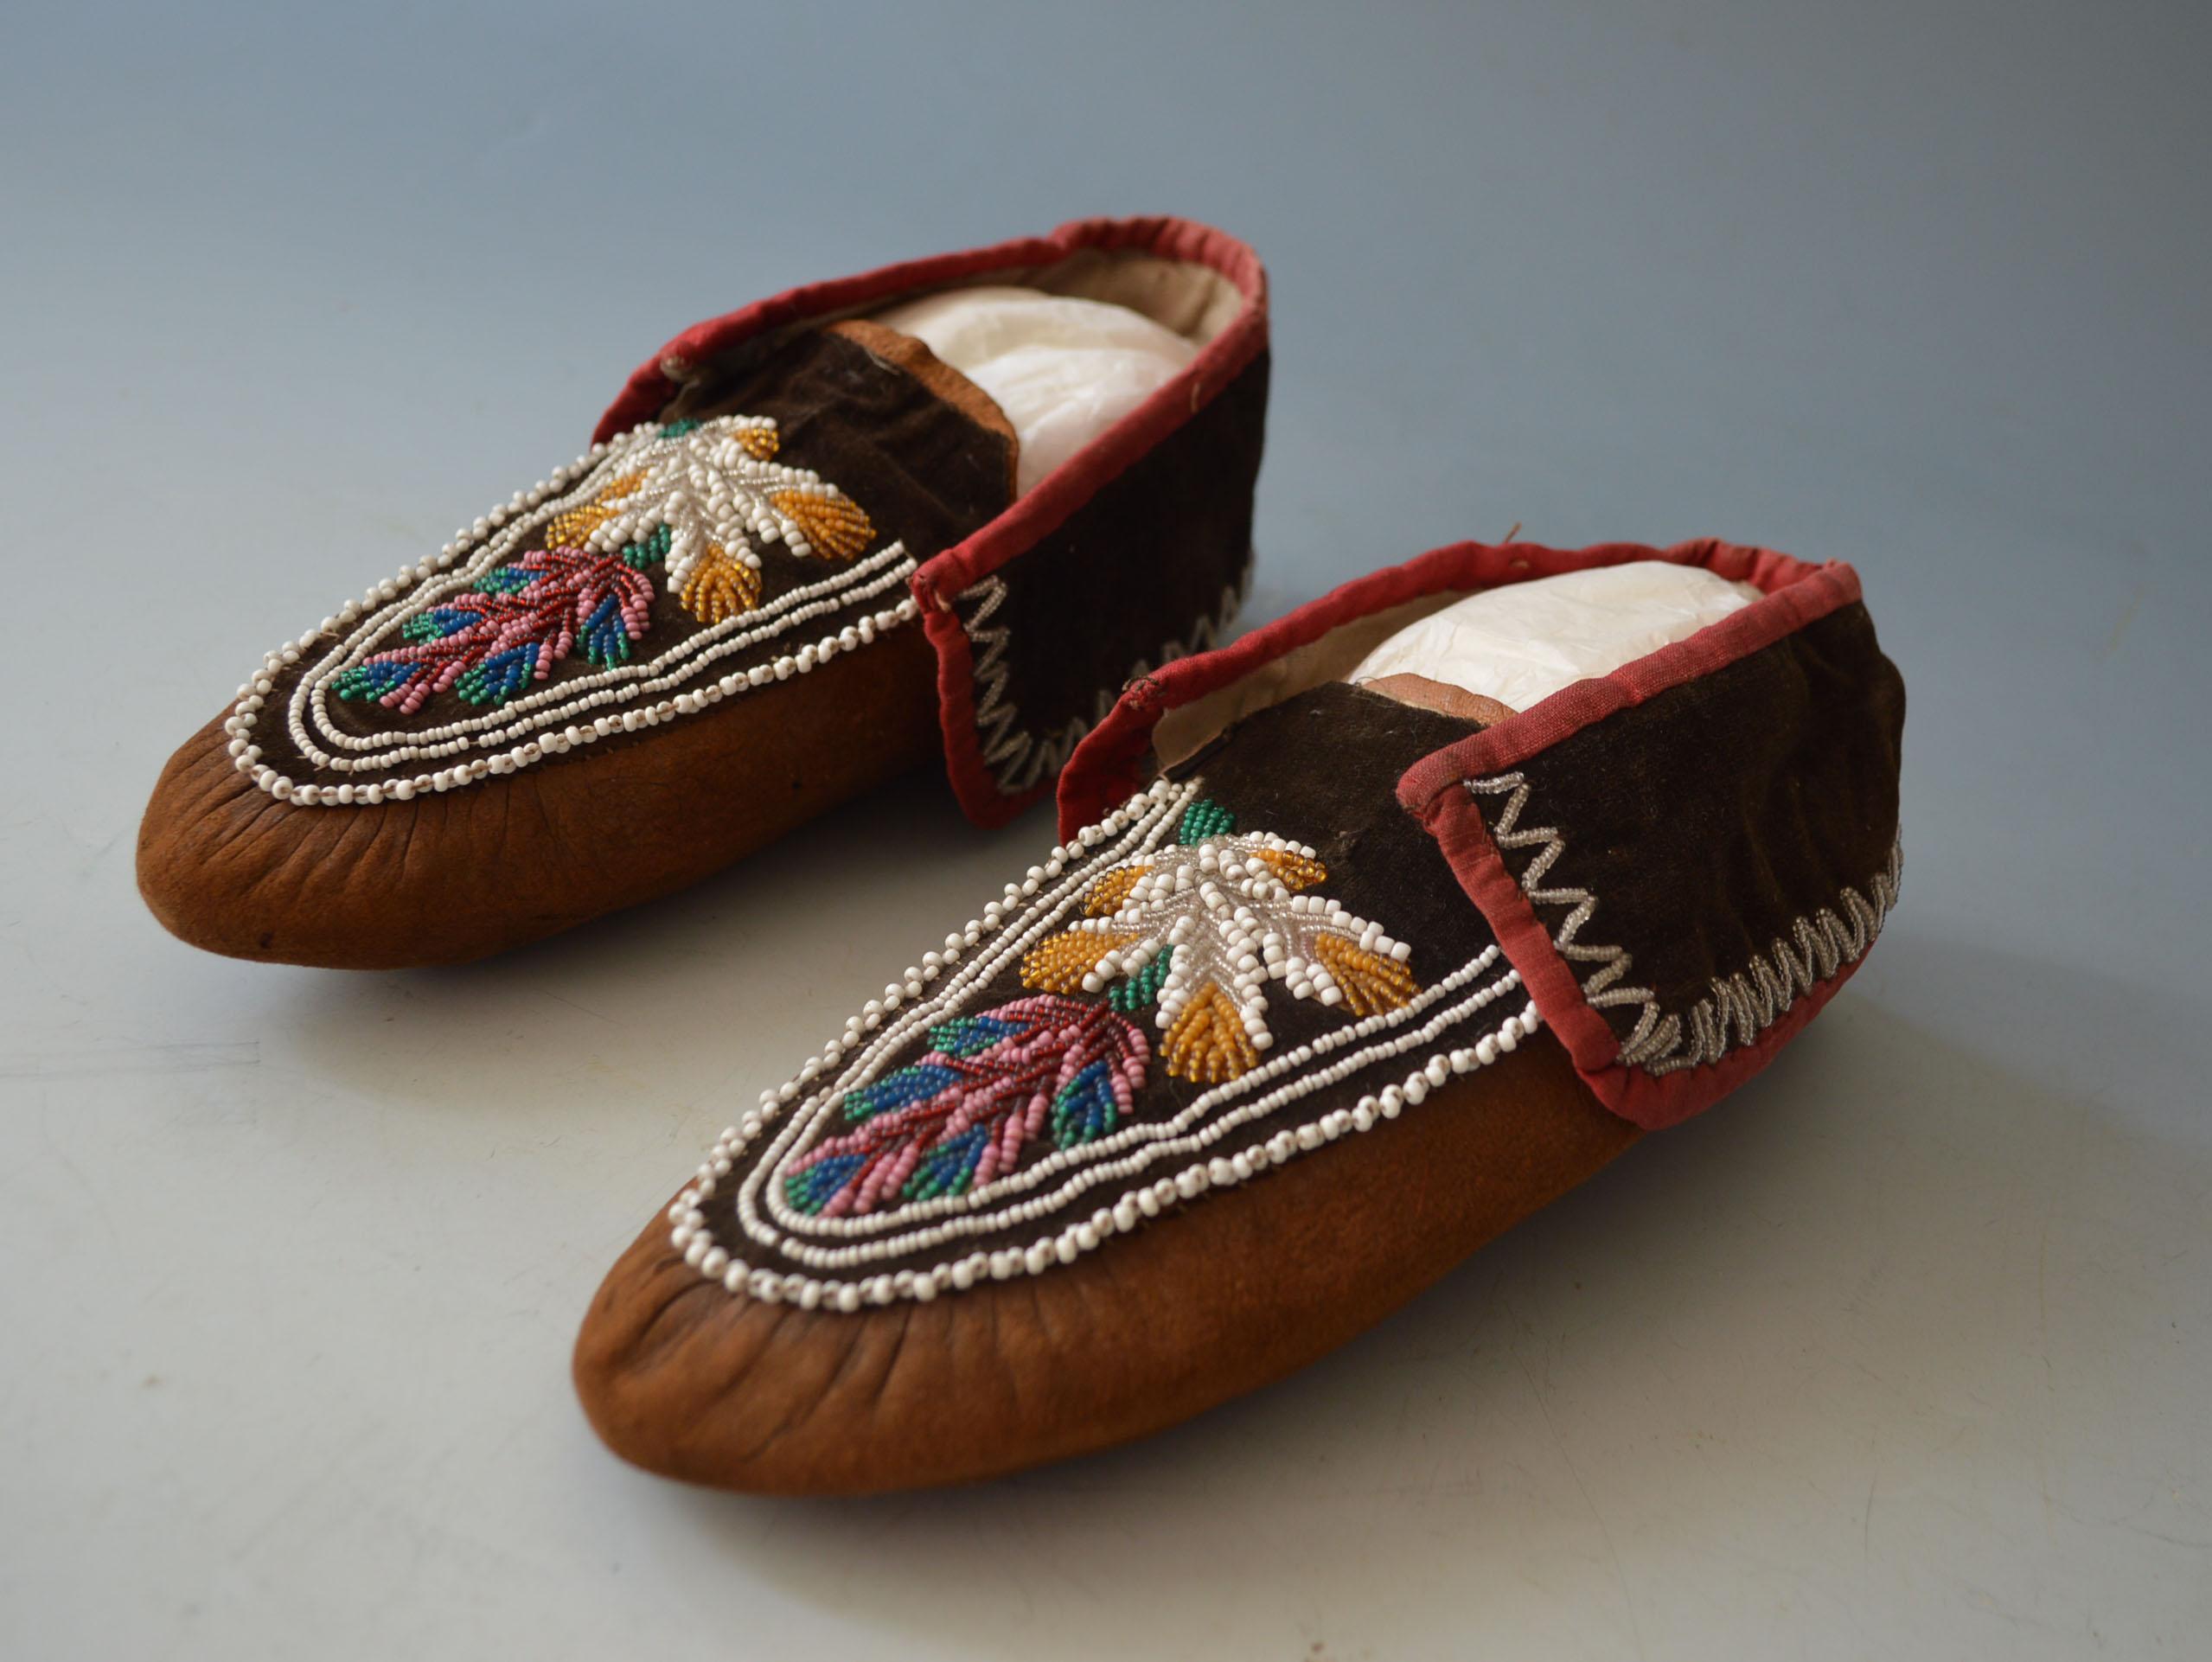 Native American Iroquois Beaded Moccasins

Buckskin Velvet  decorated with of glass beads in floral patterns

Length 24 cm

Period: 19th century

Condition: Fine.